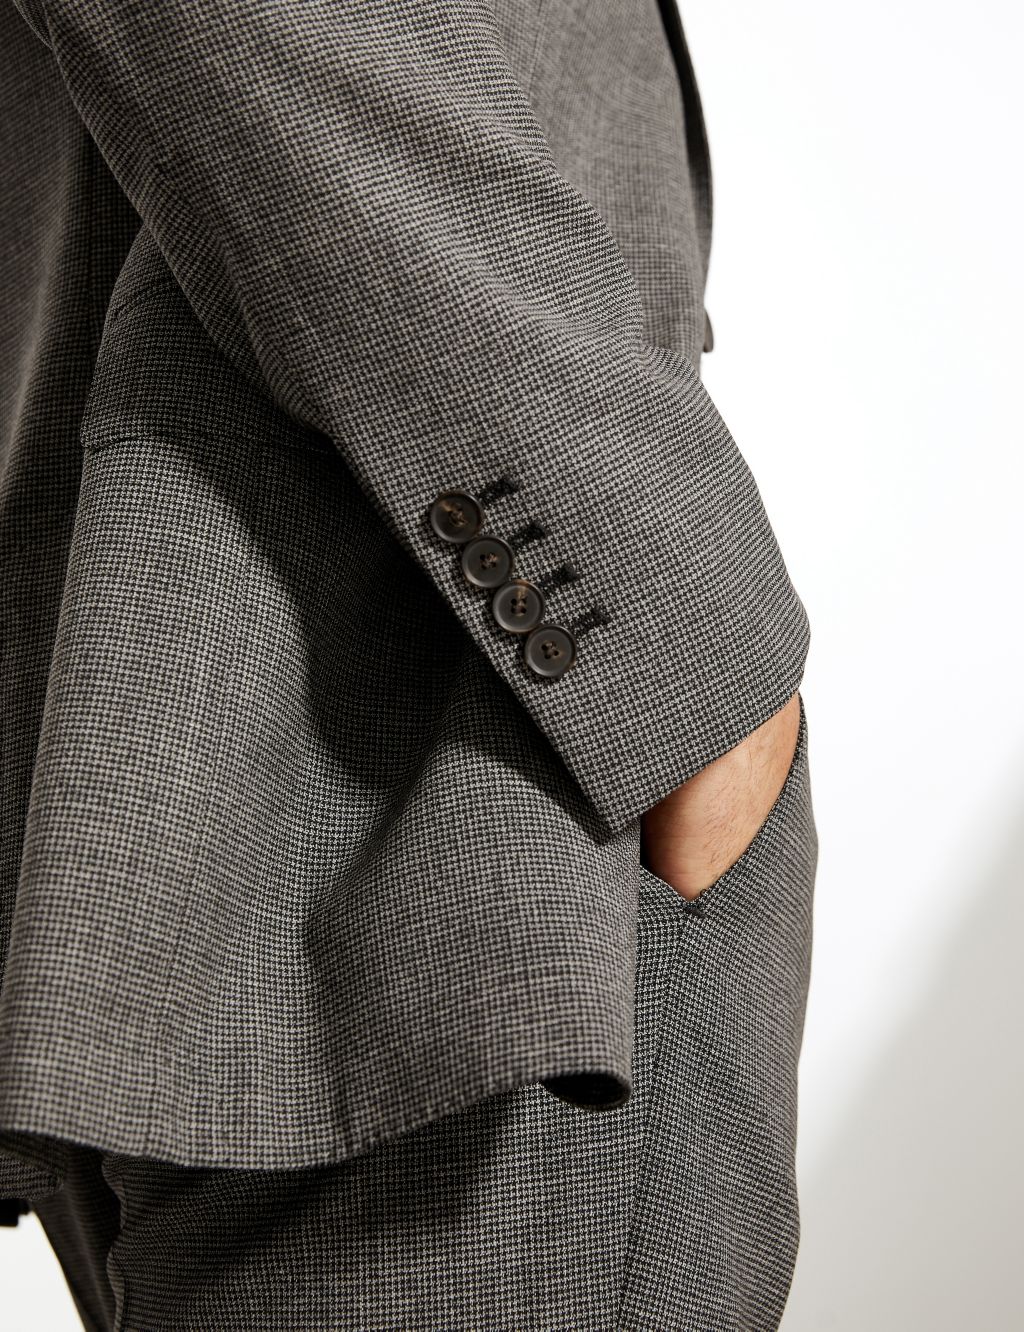 Tailored Fit Bi-Stretch Puppytooth 2 Piece Suit image 6